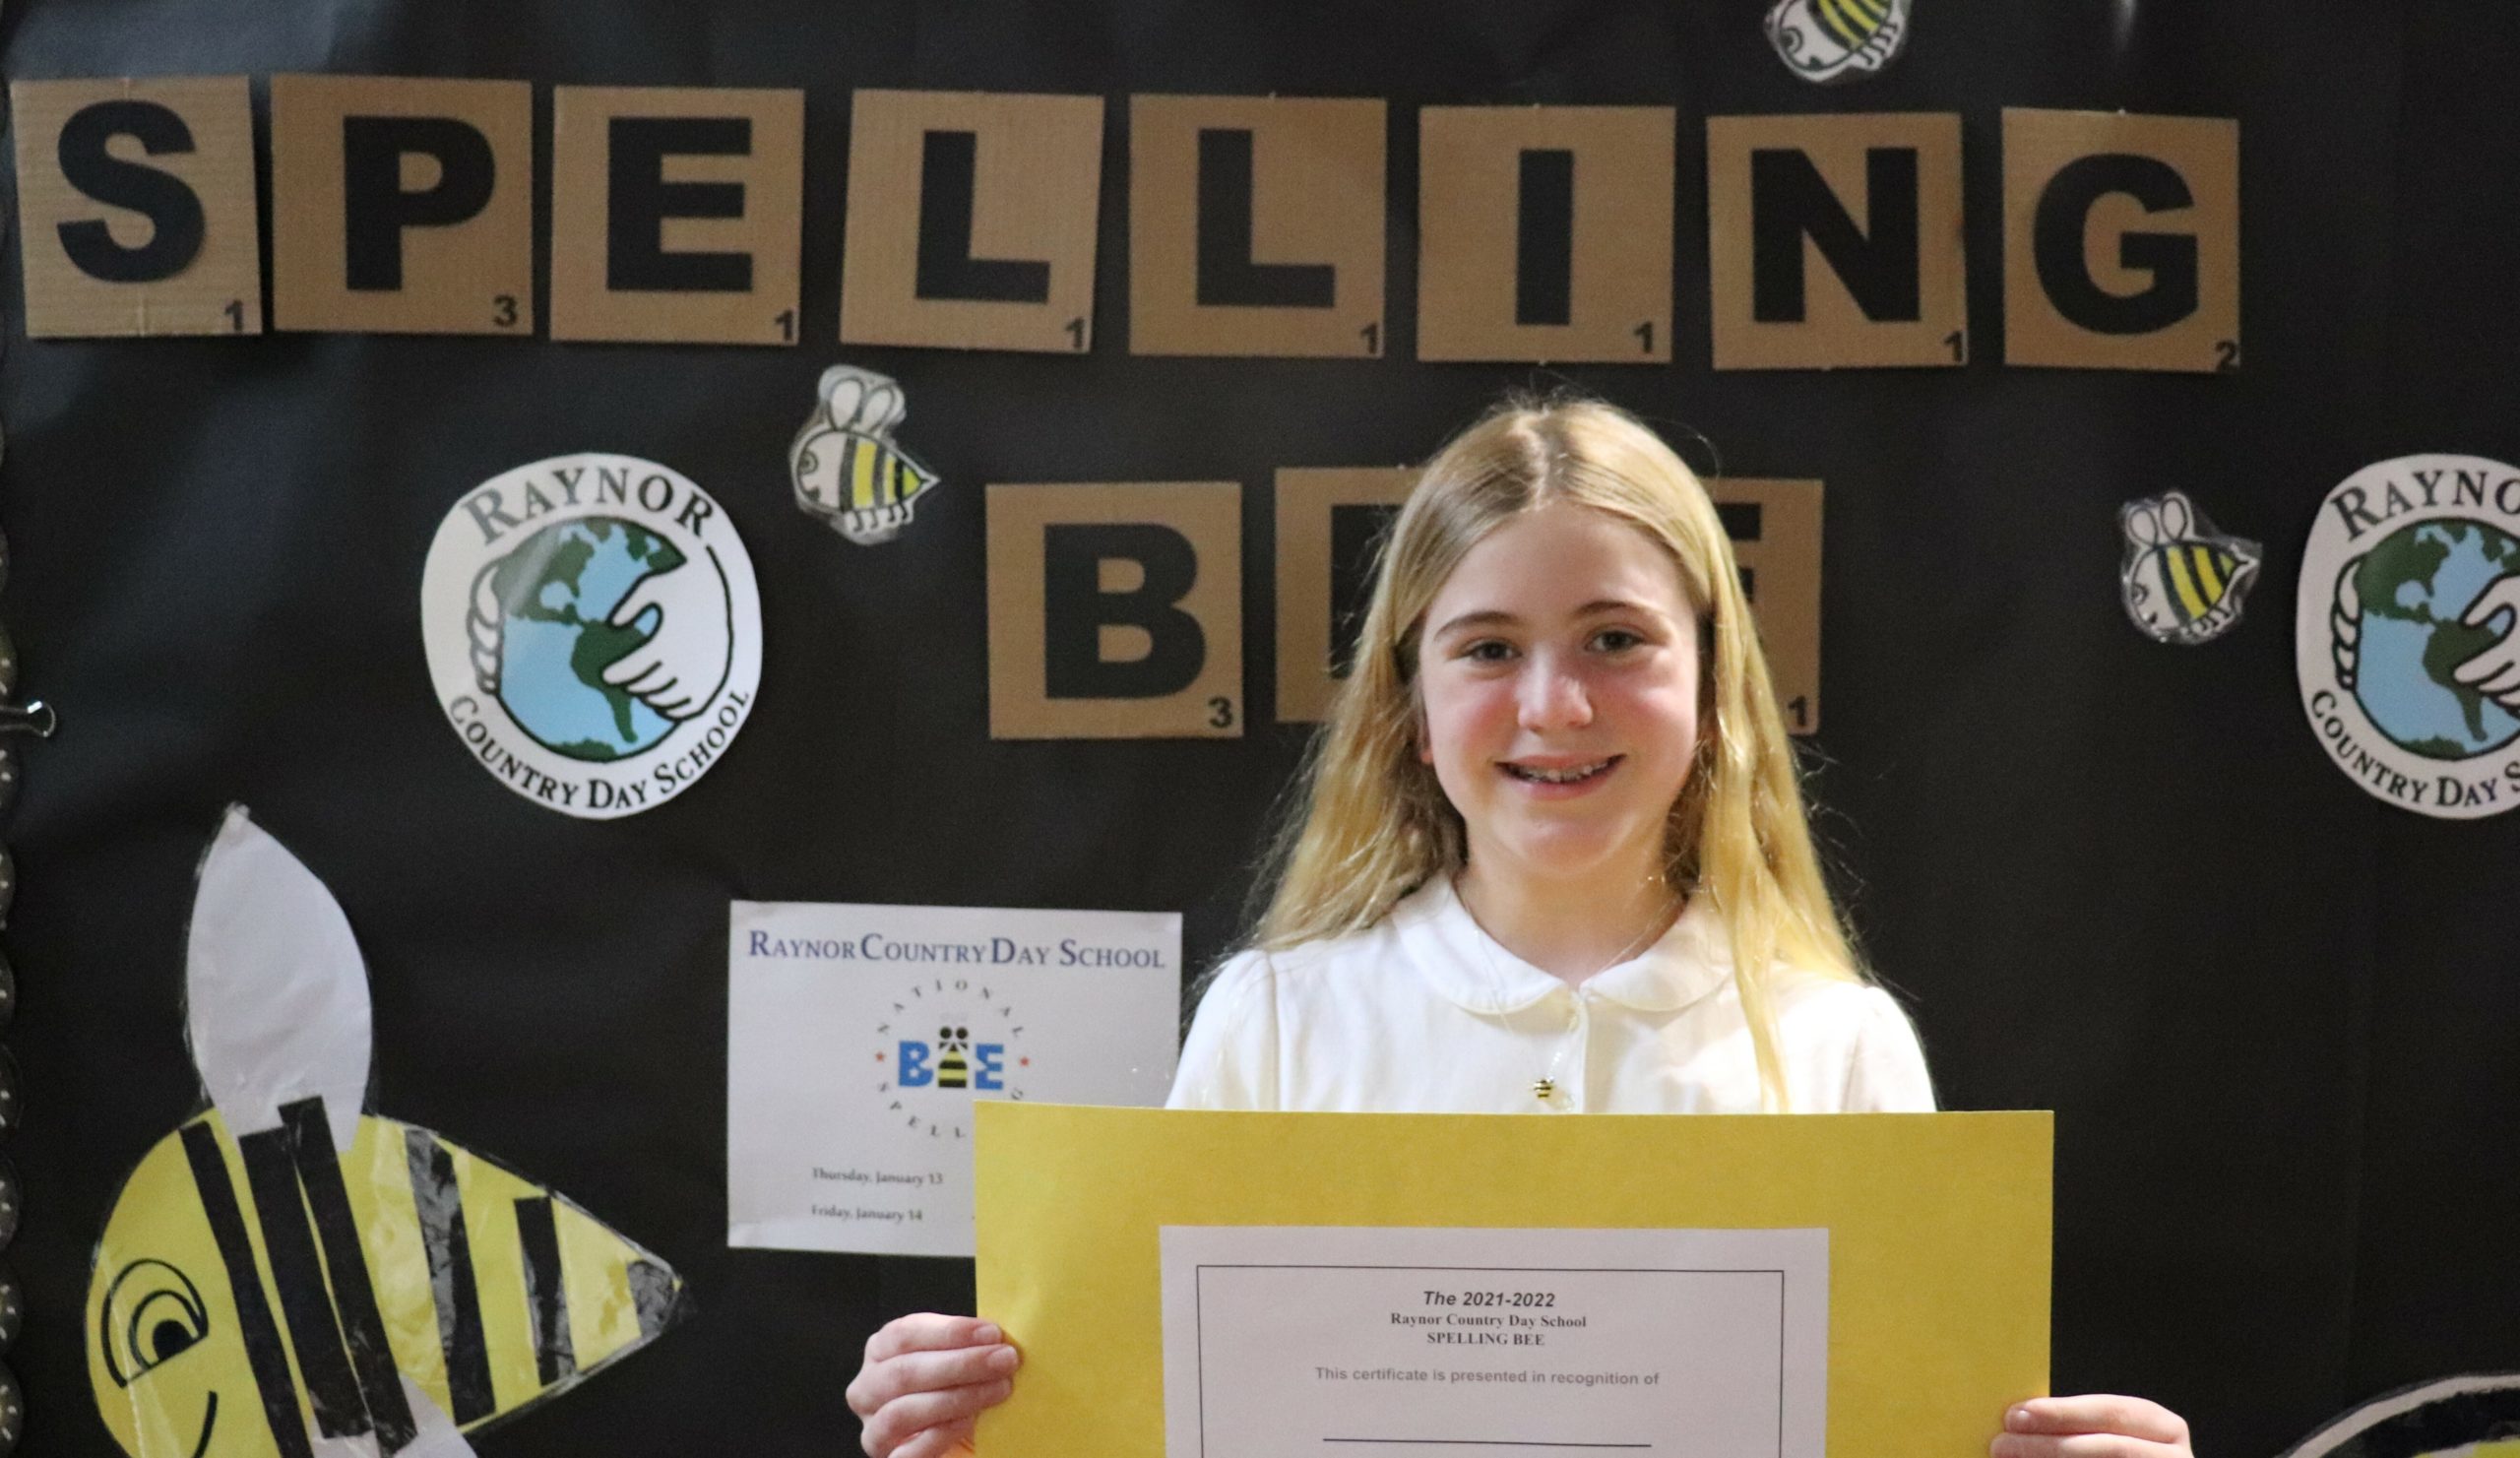 Rebecca Bartha, the Raynor Country Day School champion, will represent the school at the regional level of the Scripp's National Spelling Bee this spring.  Her first competition will be a digital assessment followed by a live spelling competition with winners from other schools in the region.